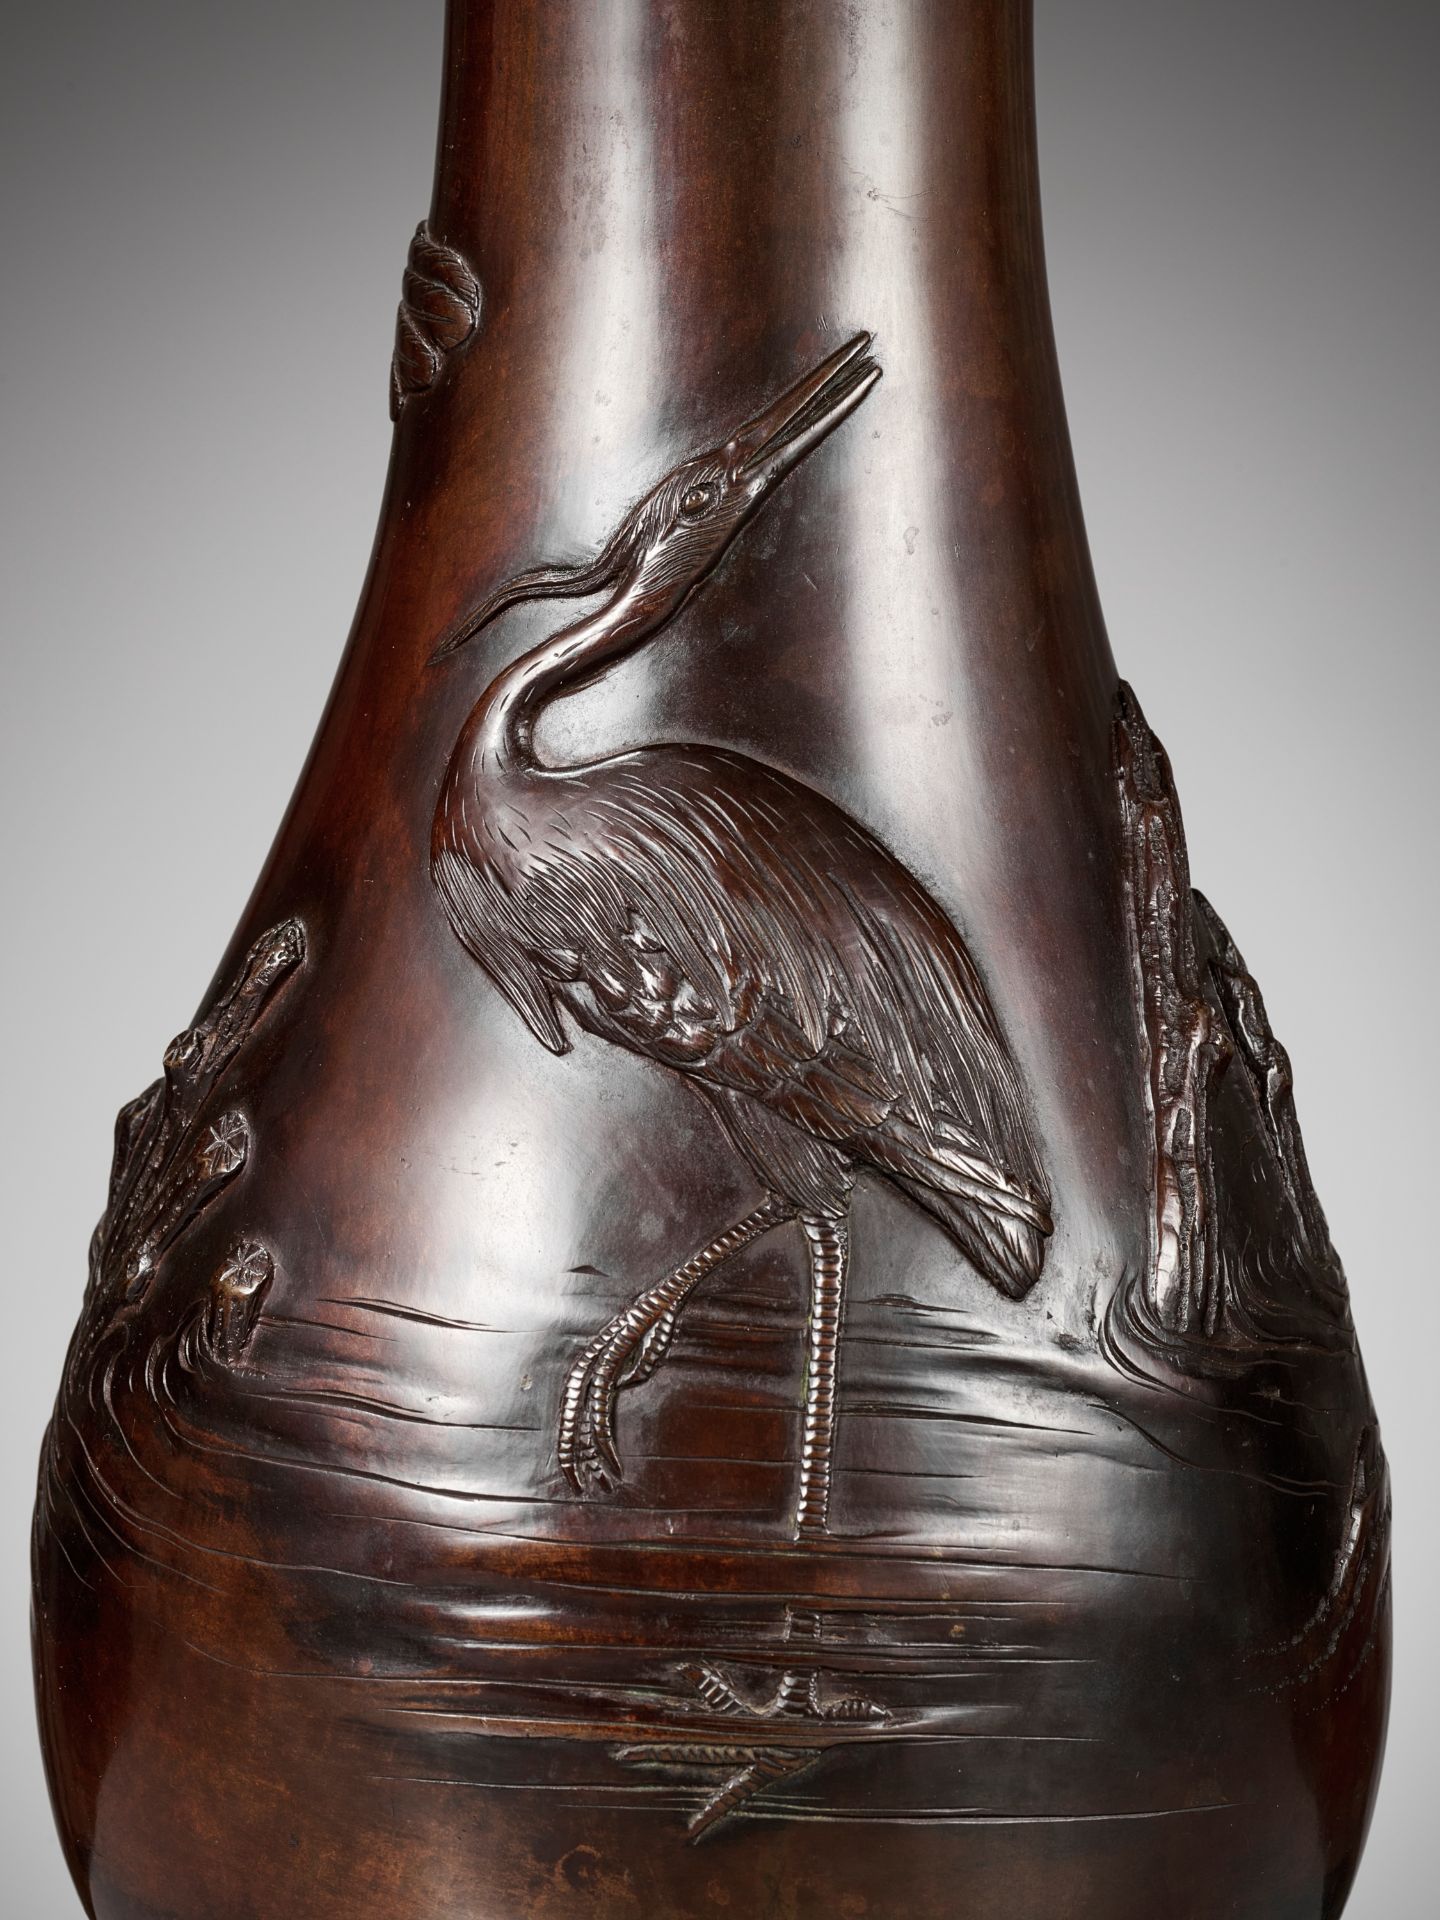 A PAIR OF BRONZE VASES DEPICTING EGRETS - Image 3 of 8